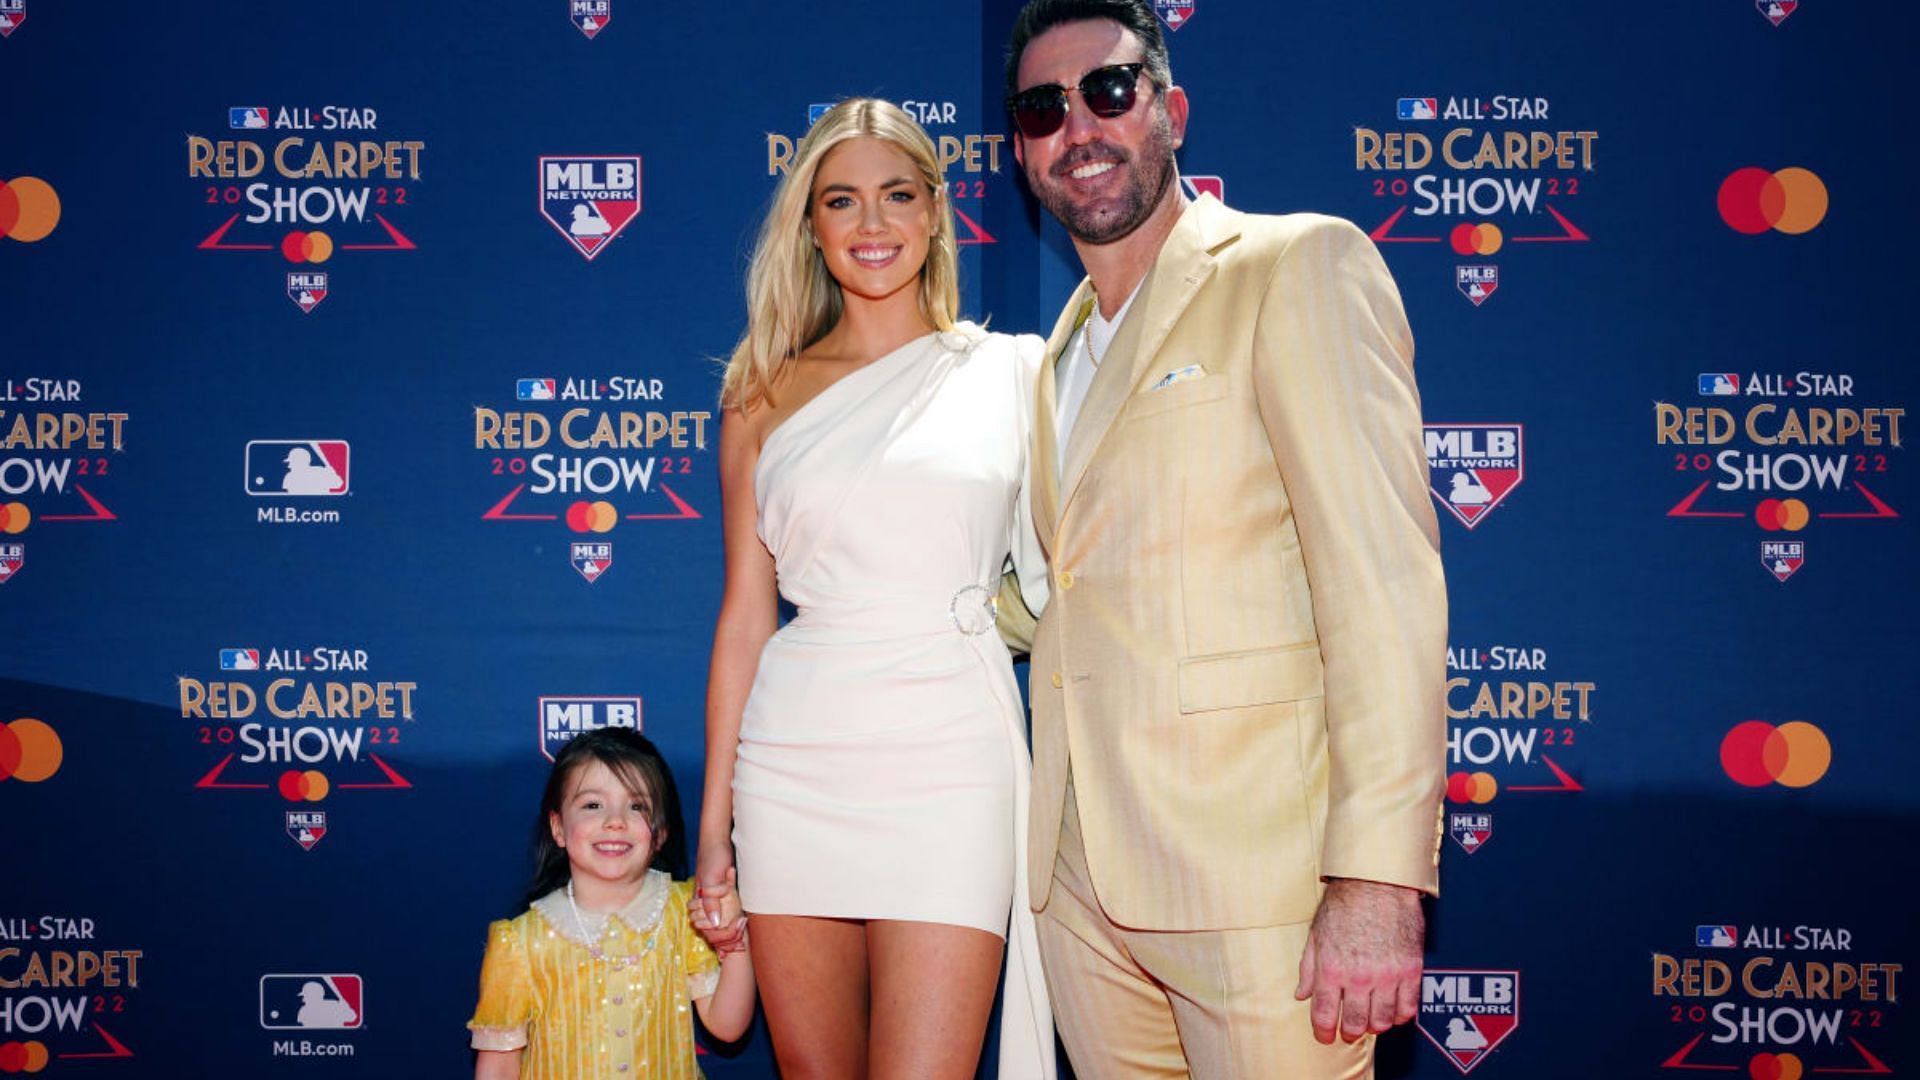 5 MLB stars' wives who brought glitz and glamour to the Dodger